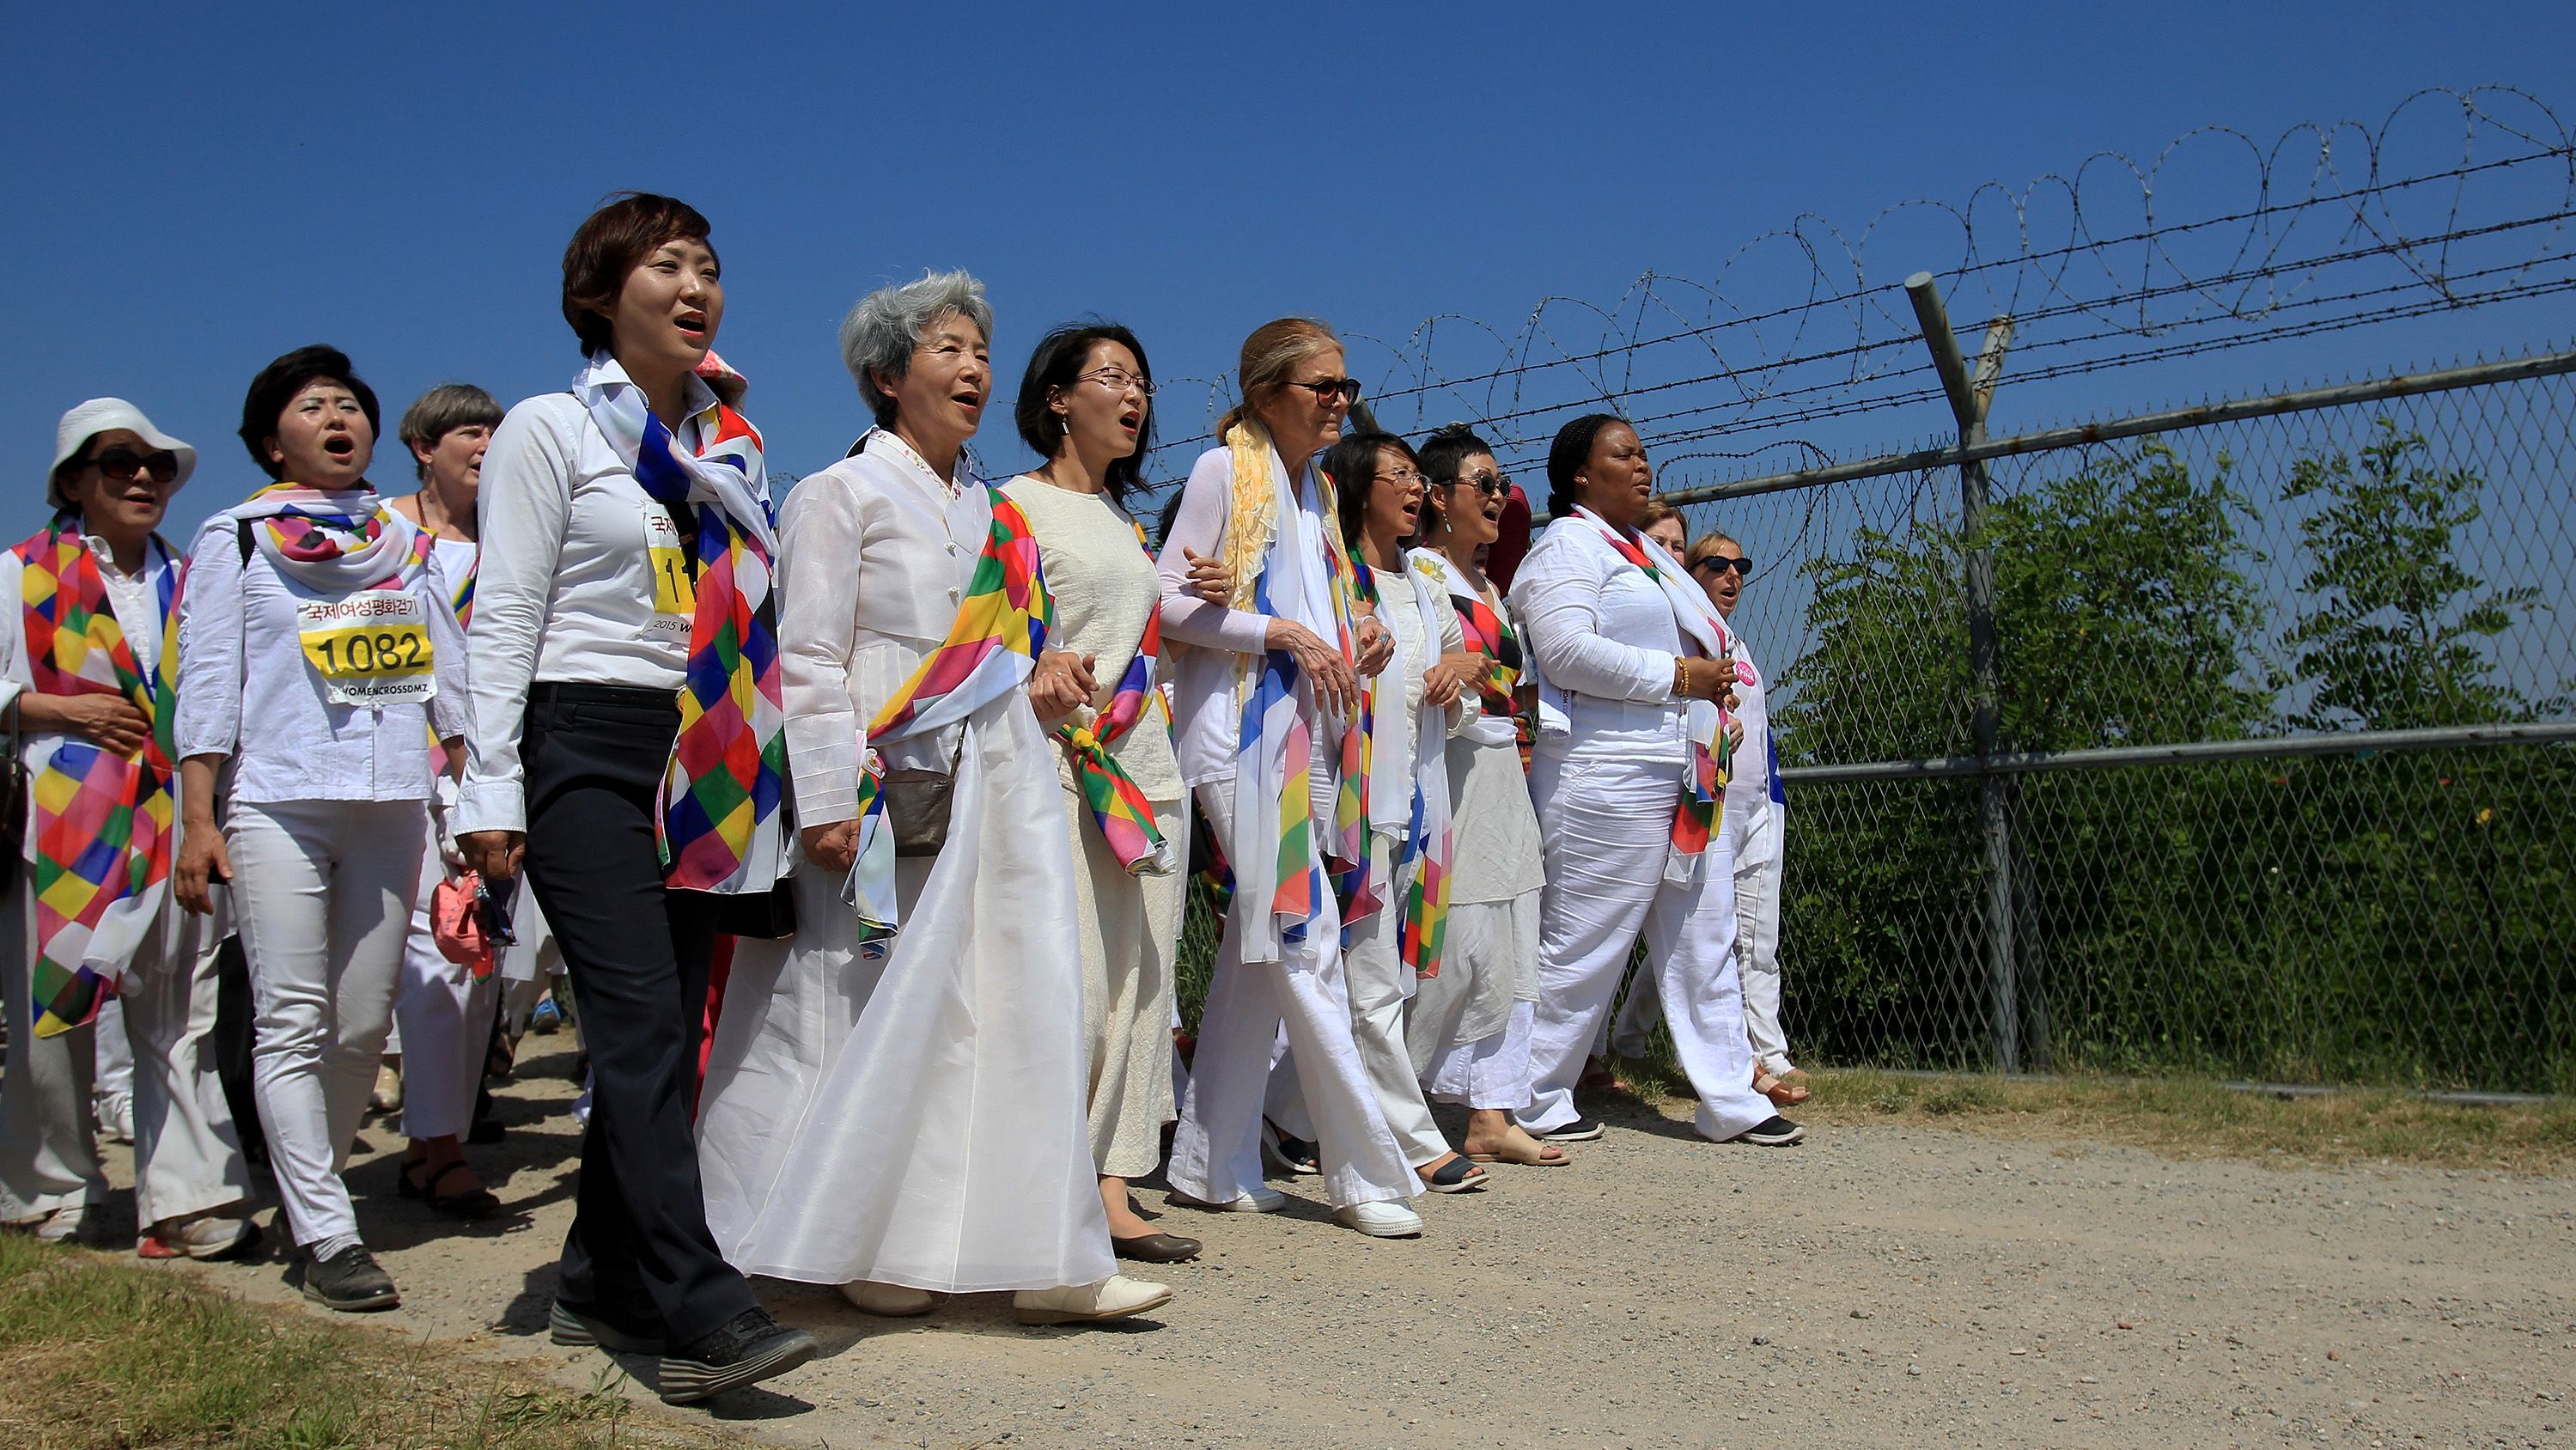 United States activist Gloria Steinem, center, marches with other activists to the Imjingak Pavilion along the military wire fences near the border village of Panmunjom on May 24, 2015 in Paju, South Korea.